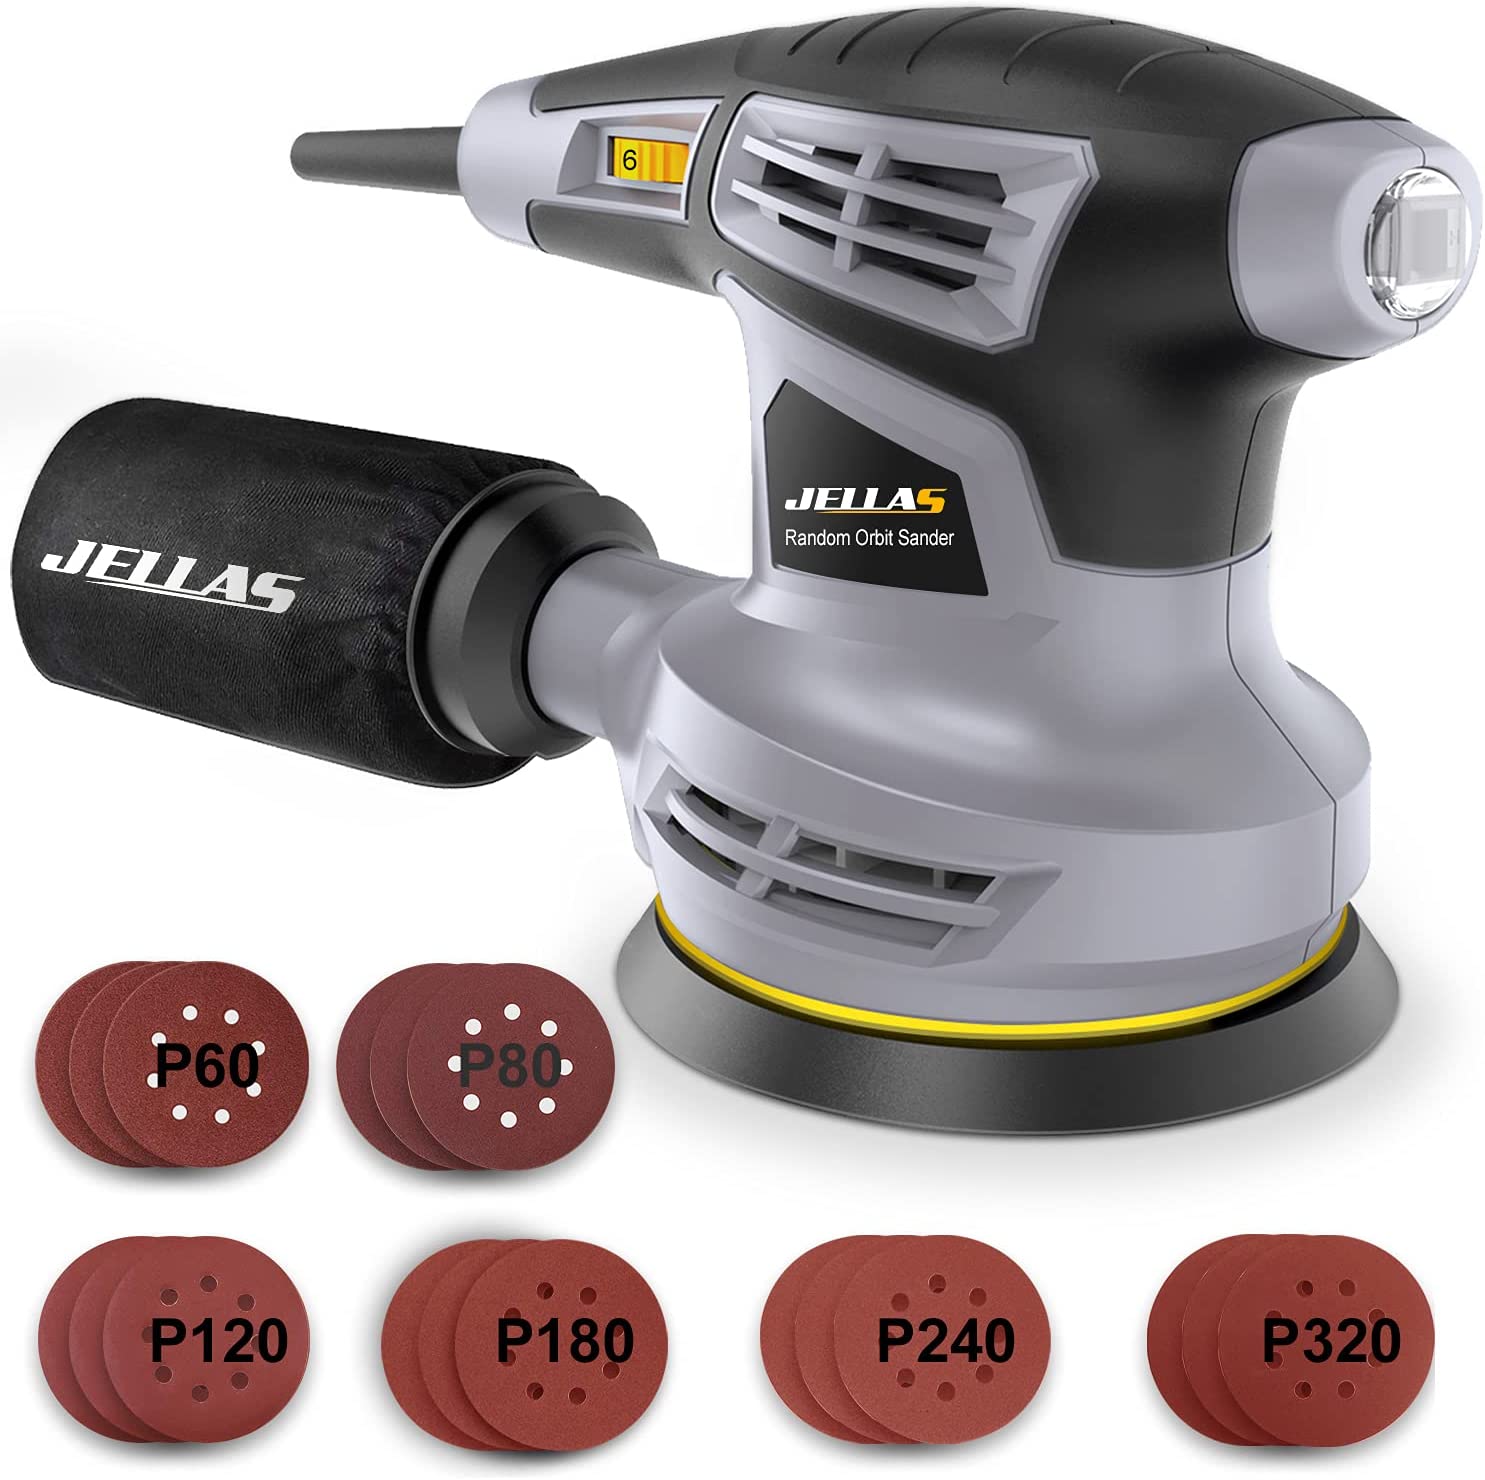 Jellas 5-Inch Random Orbital Sander with 18Pcs Sandpapers, 13000RPM 6 Variable Speed Sander Machine, High Performance Dust Collection System for Woodworking, 2.5A, Dust Collection Bag Include - OS280